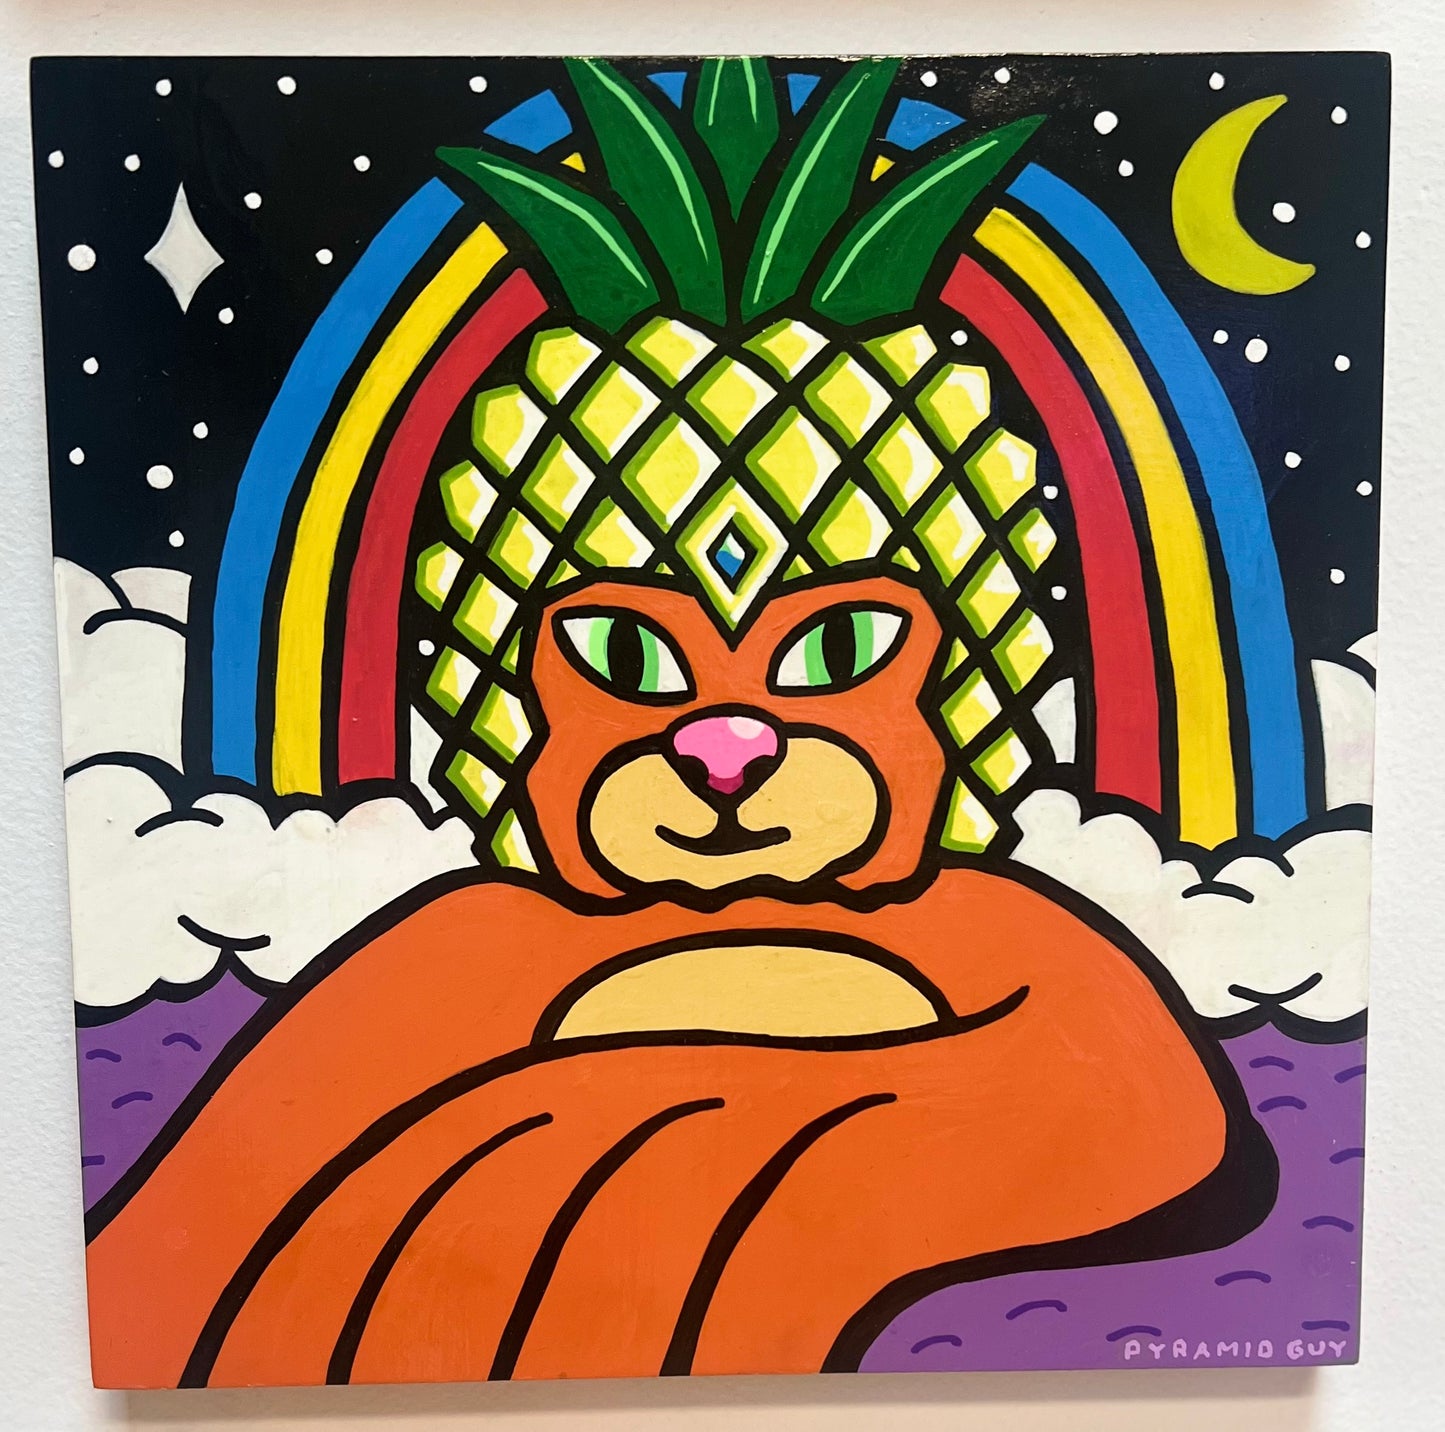 "Pineapple Kitty" by Pyramid Guy - 12x12